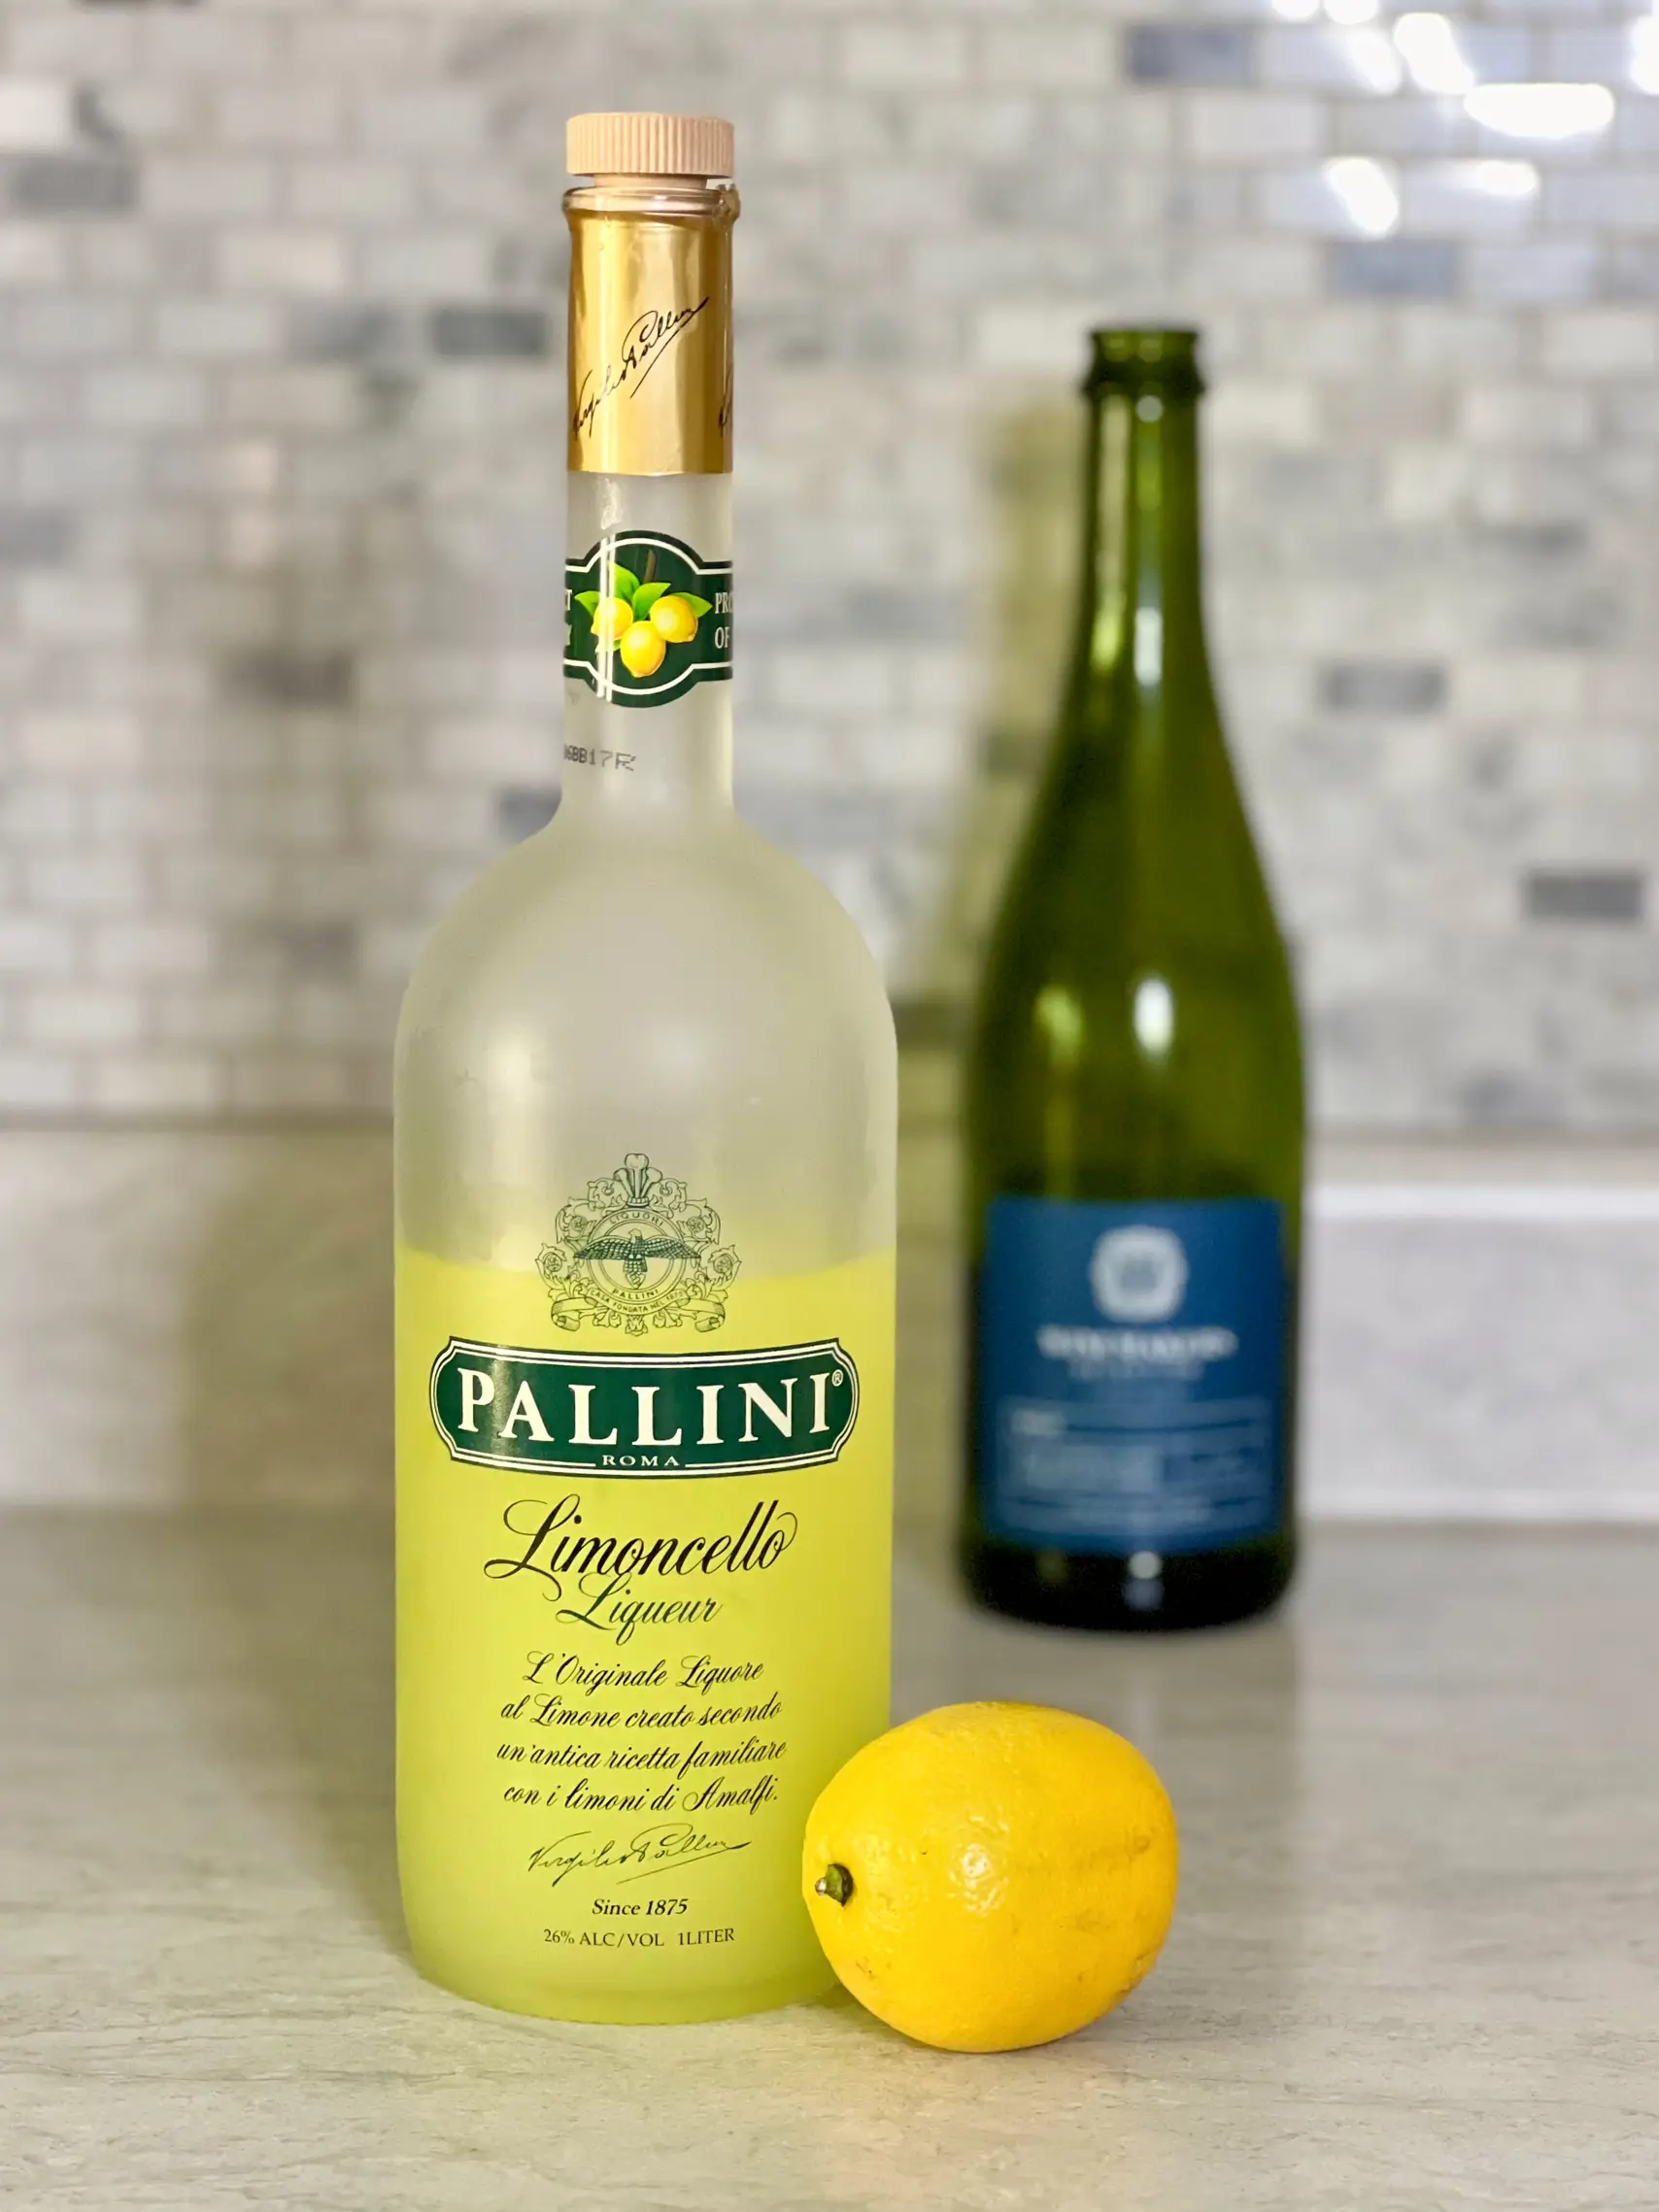 Limoncello mimosa! 🍋 | SamanthaCZ | Gallery posted Lemon8 by